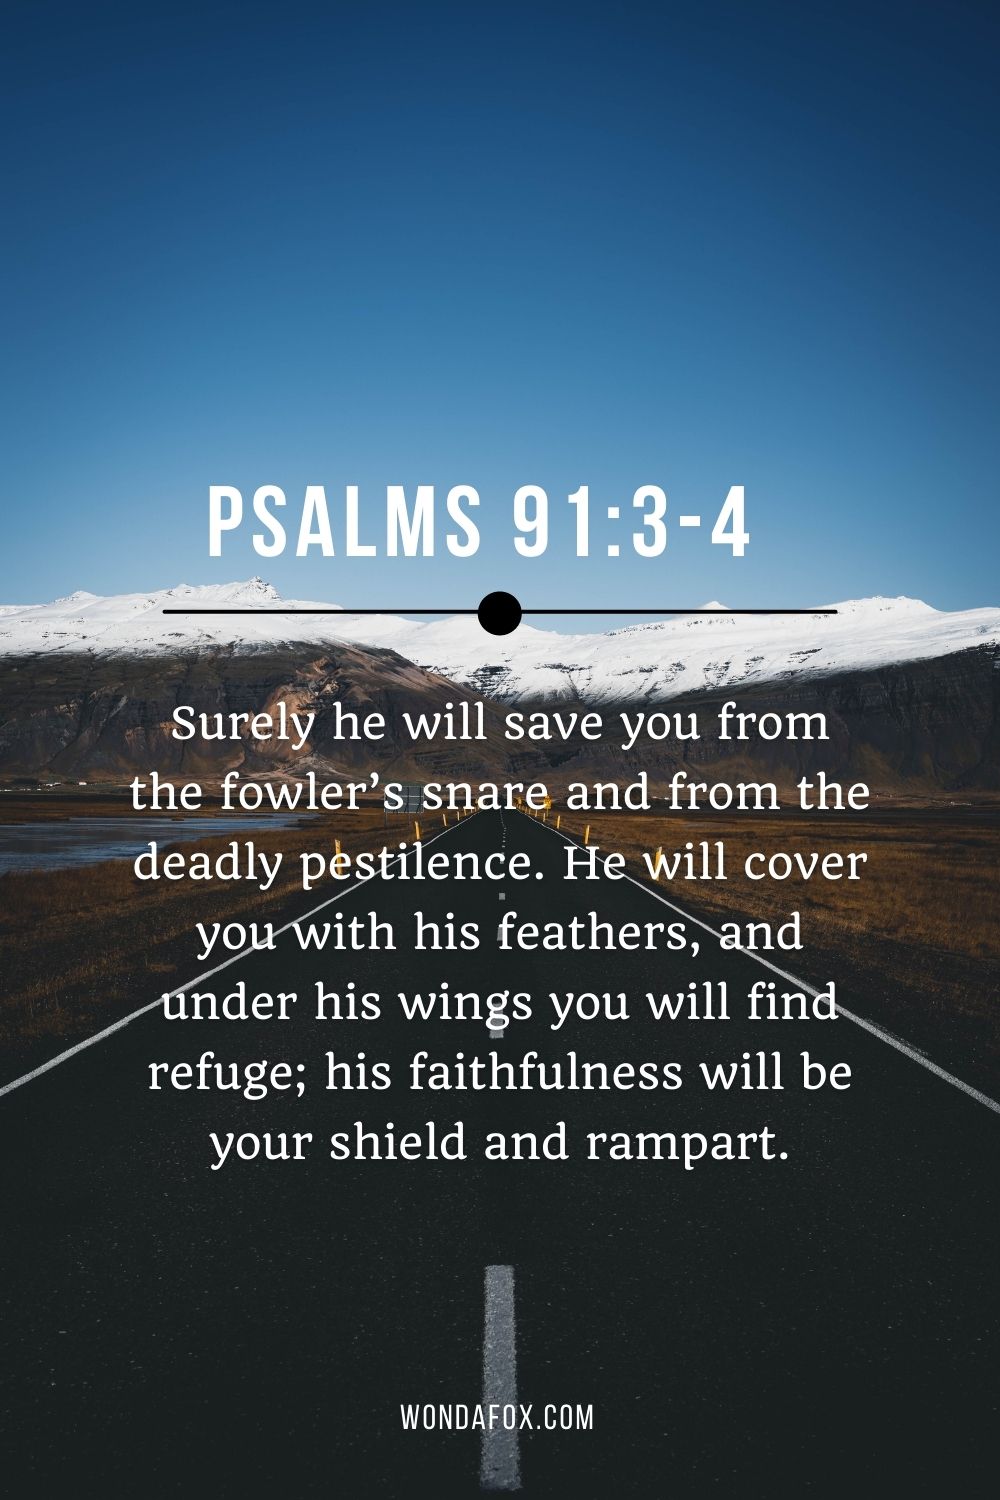 Surely he will save you from the fowler’s snare and from the deadly pestilence. He will cover you with his feathers, and under his wings you will find refuge; his faithfulness will be your shield and rampart